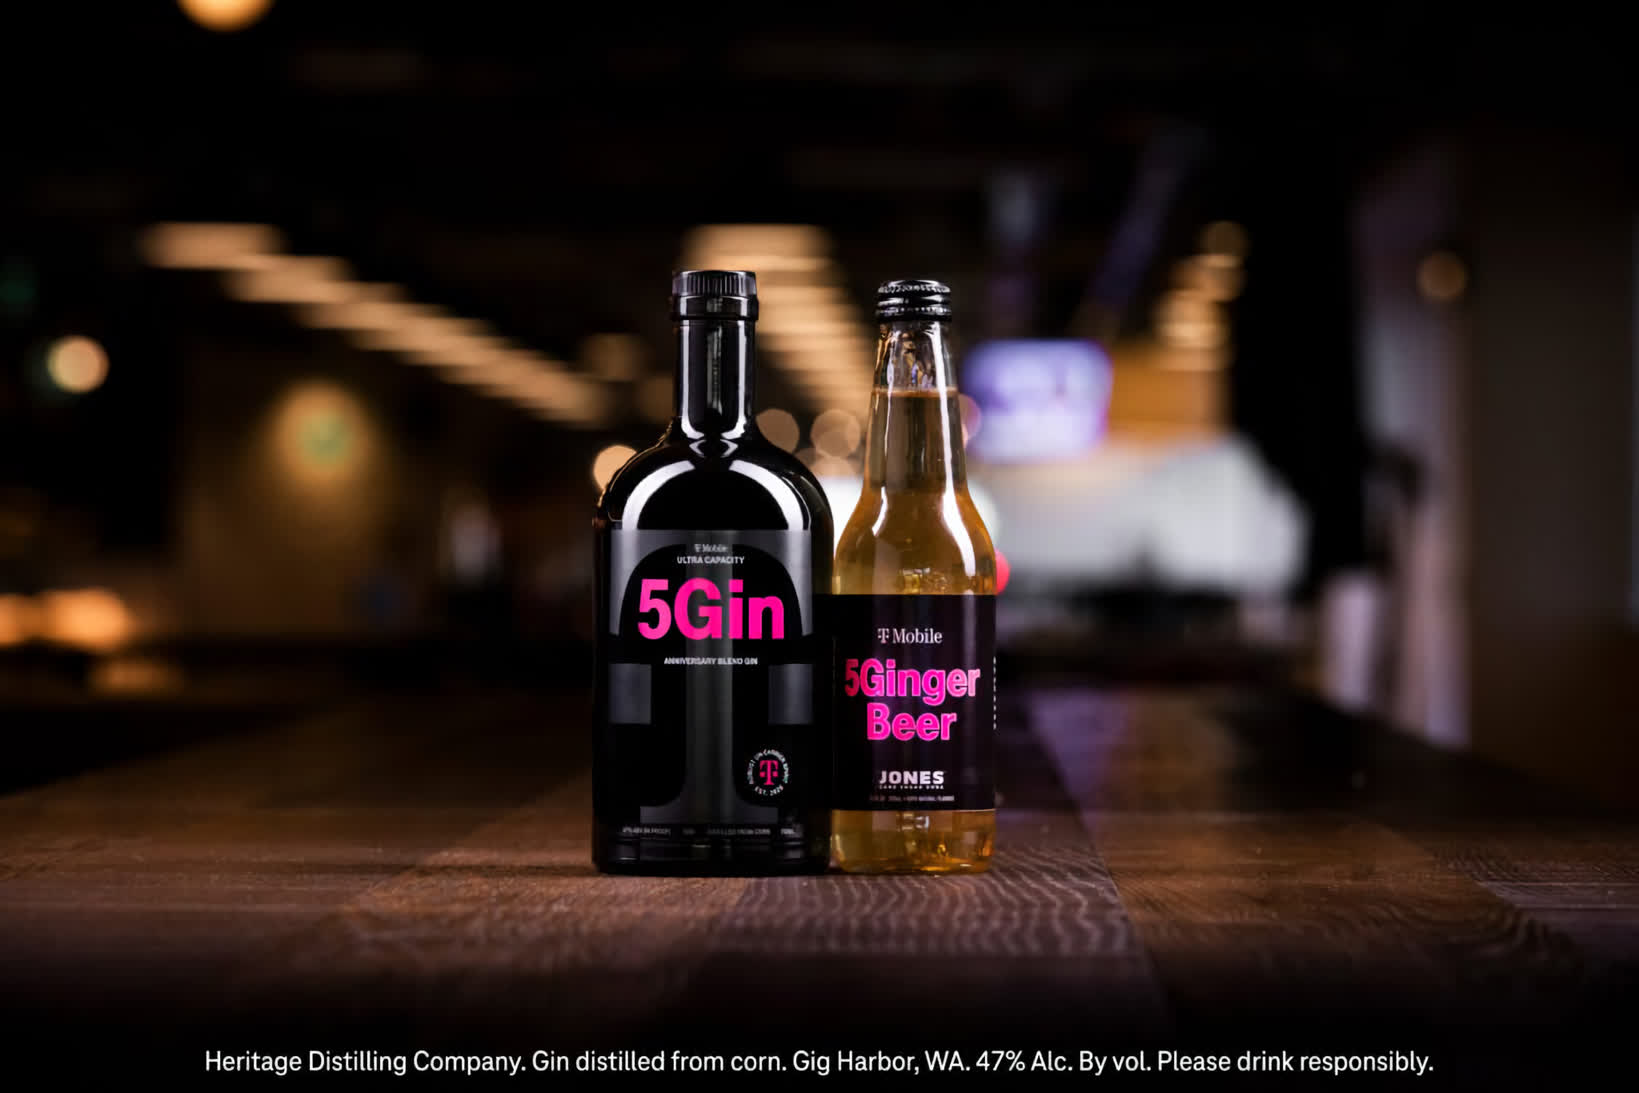 T-Mobile wants to sell you branded gin and beer to help promote 5G